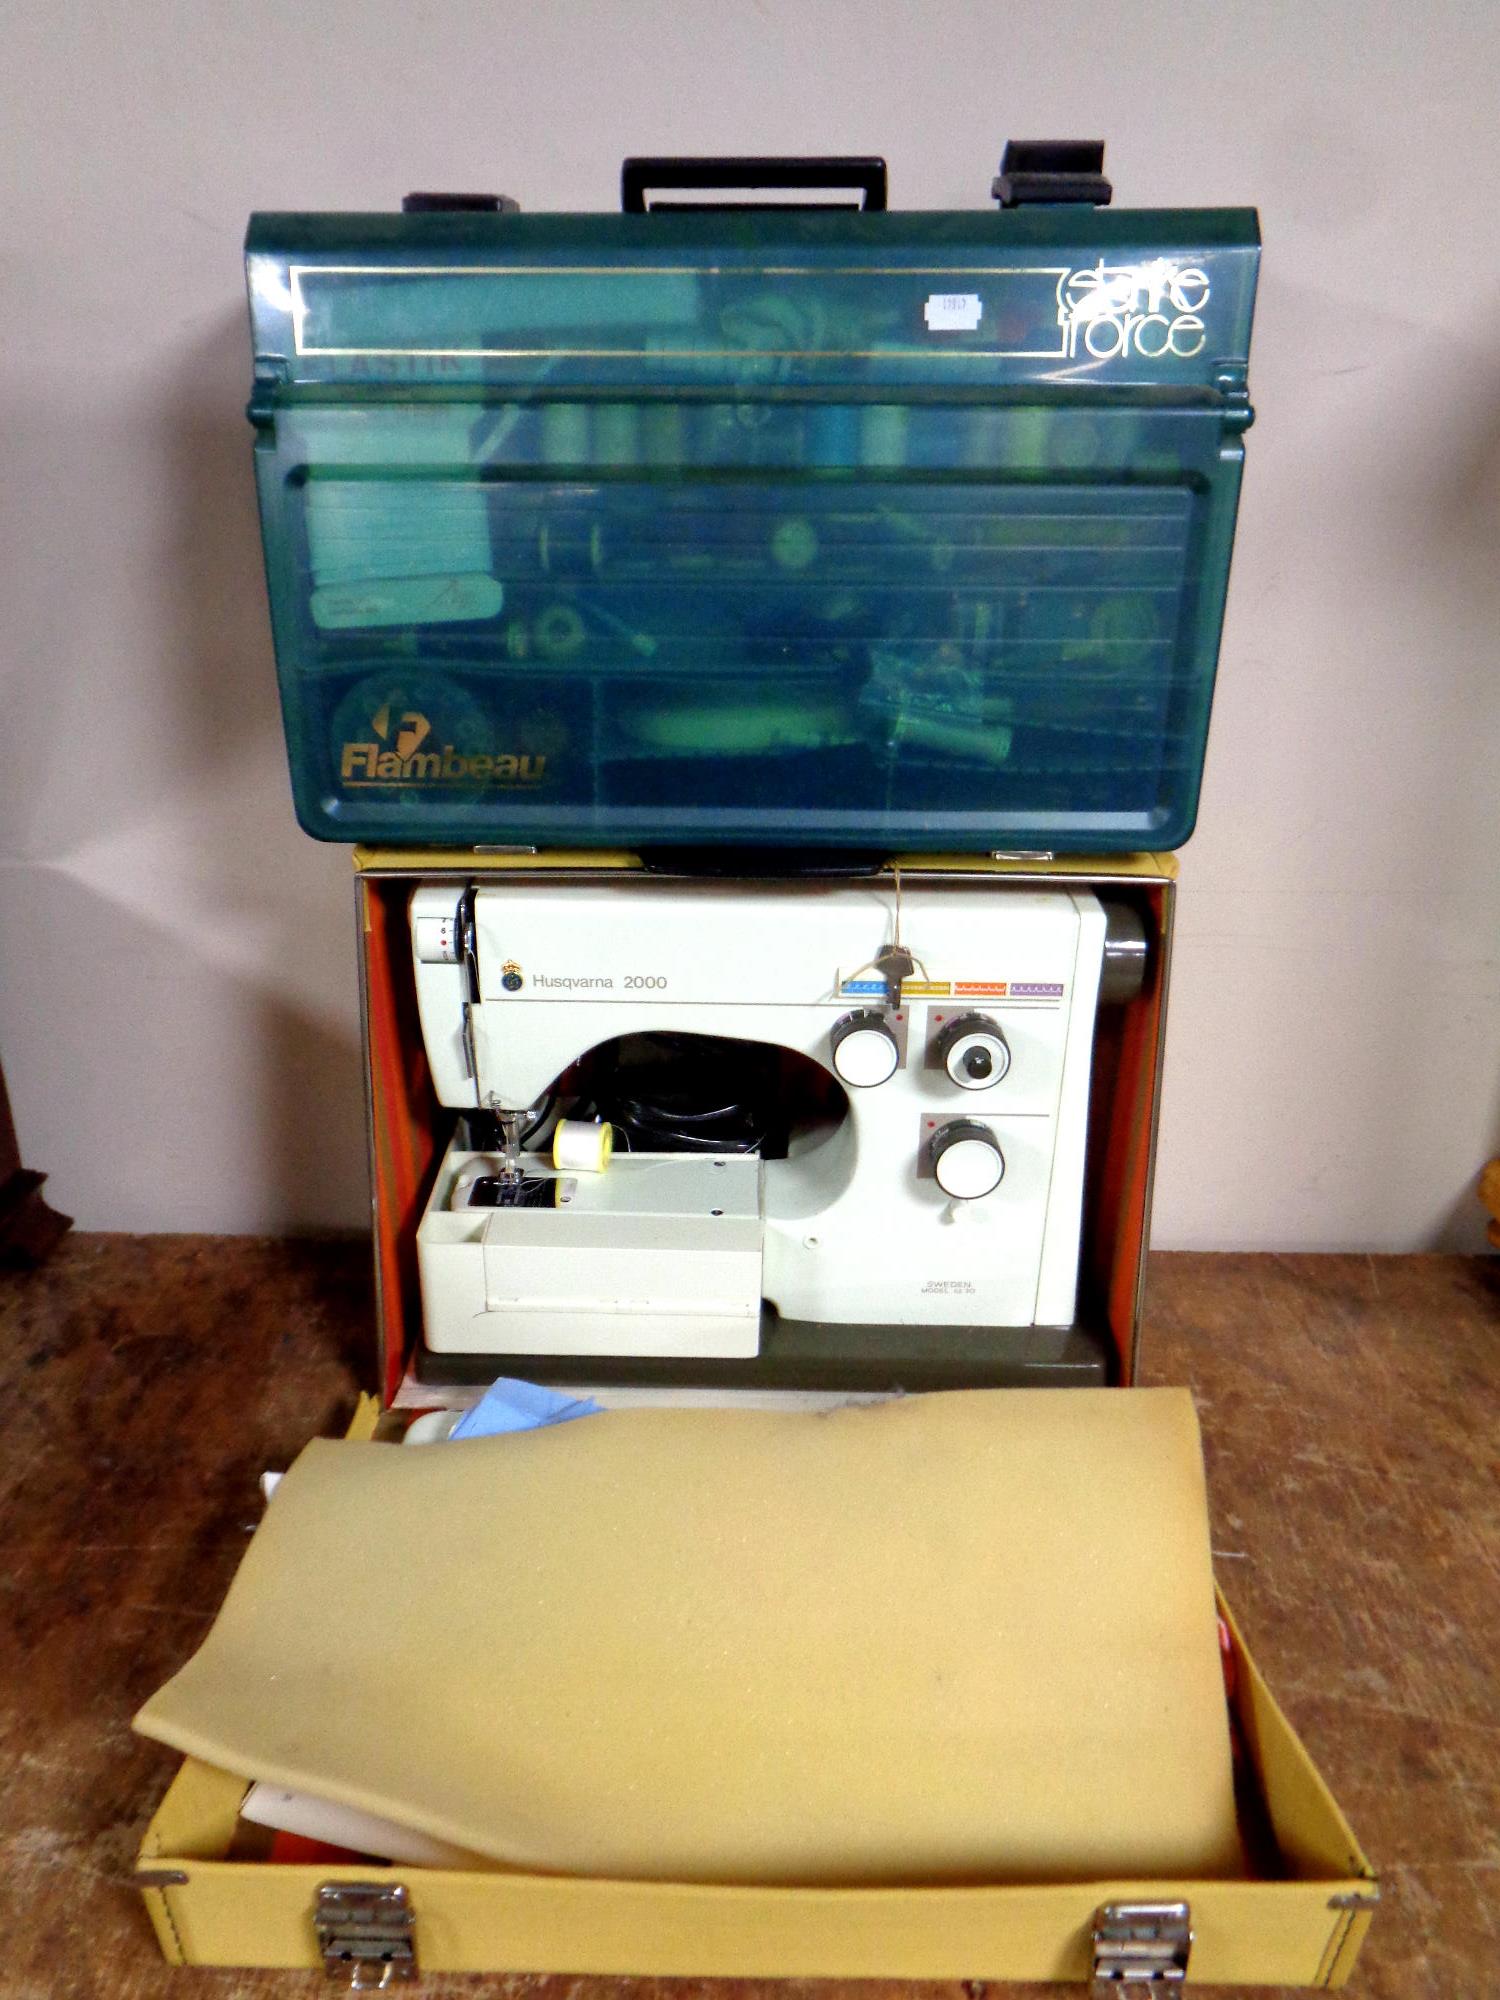 A Husqvarna 2000 electric sewing machine in case (continental wiring) together with a plastic case